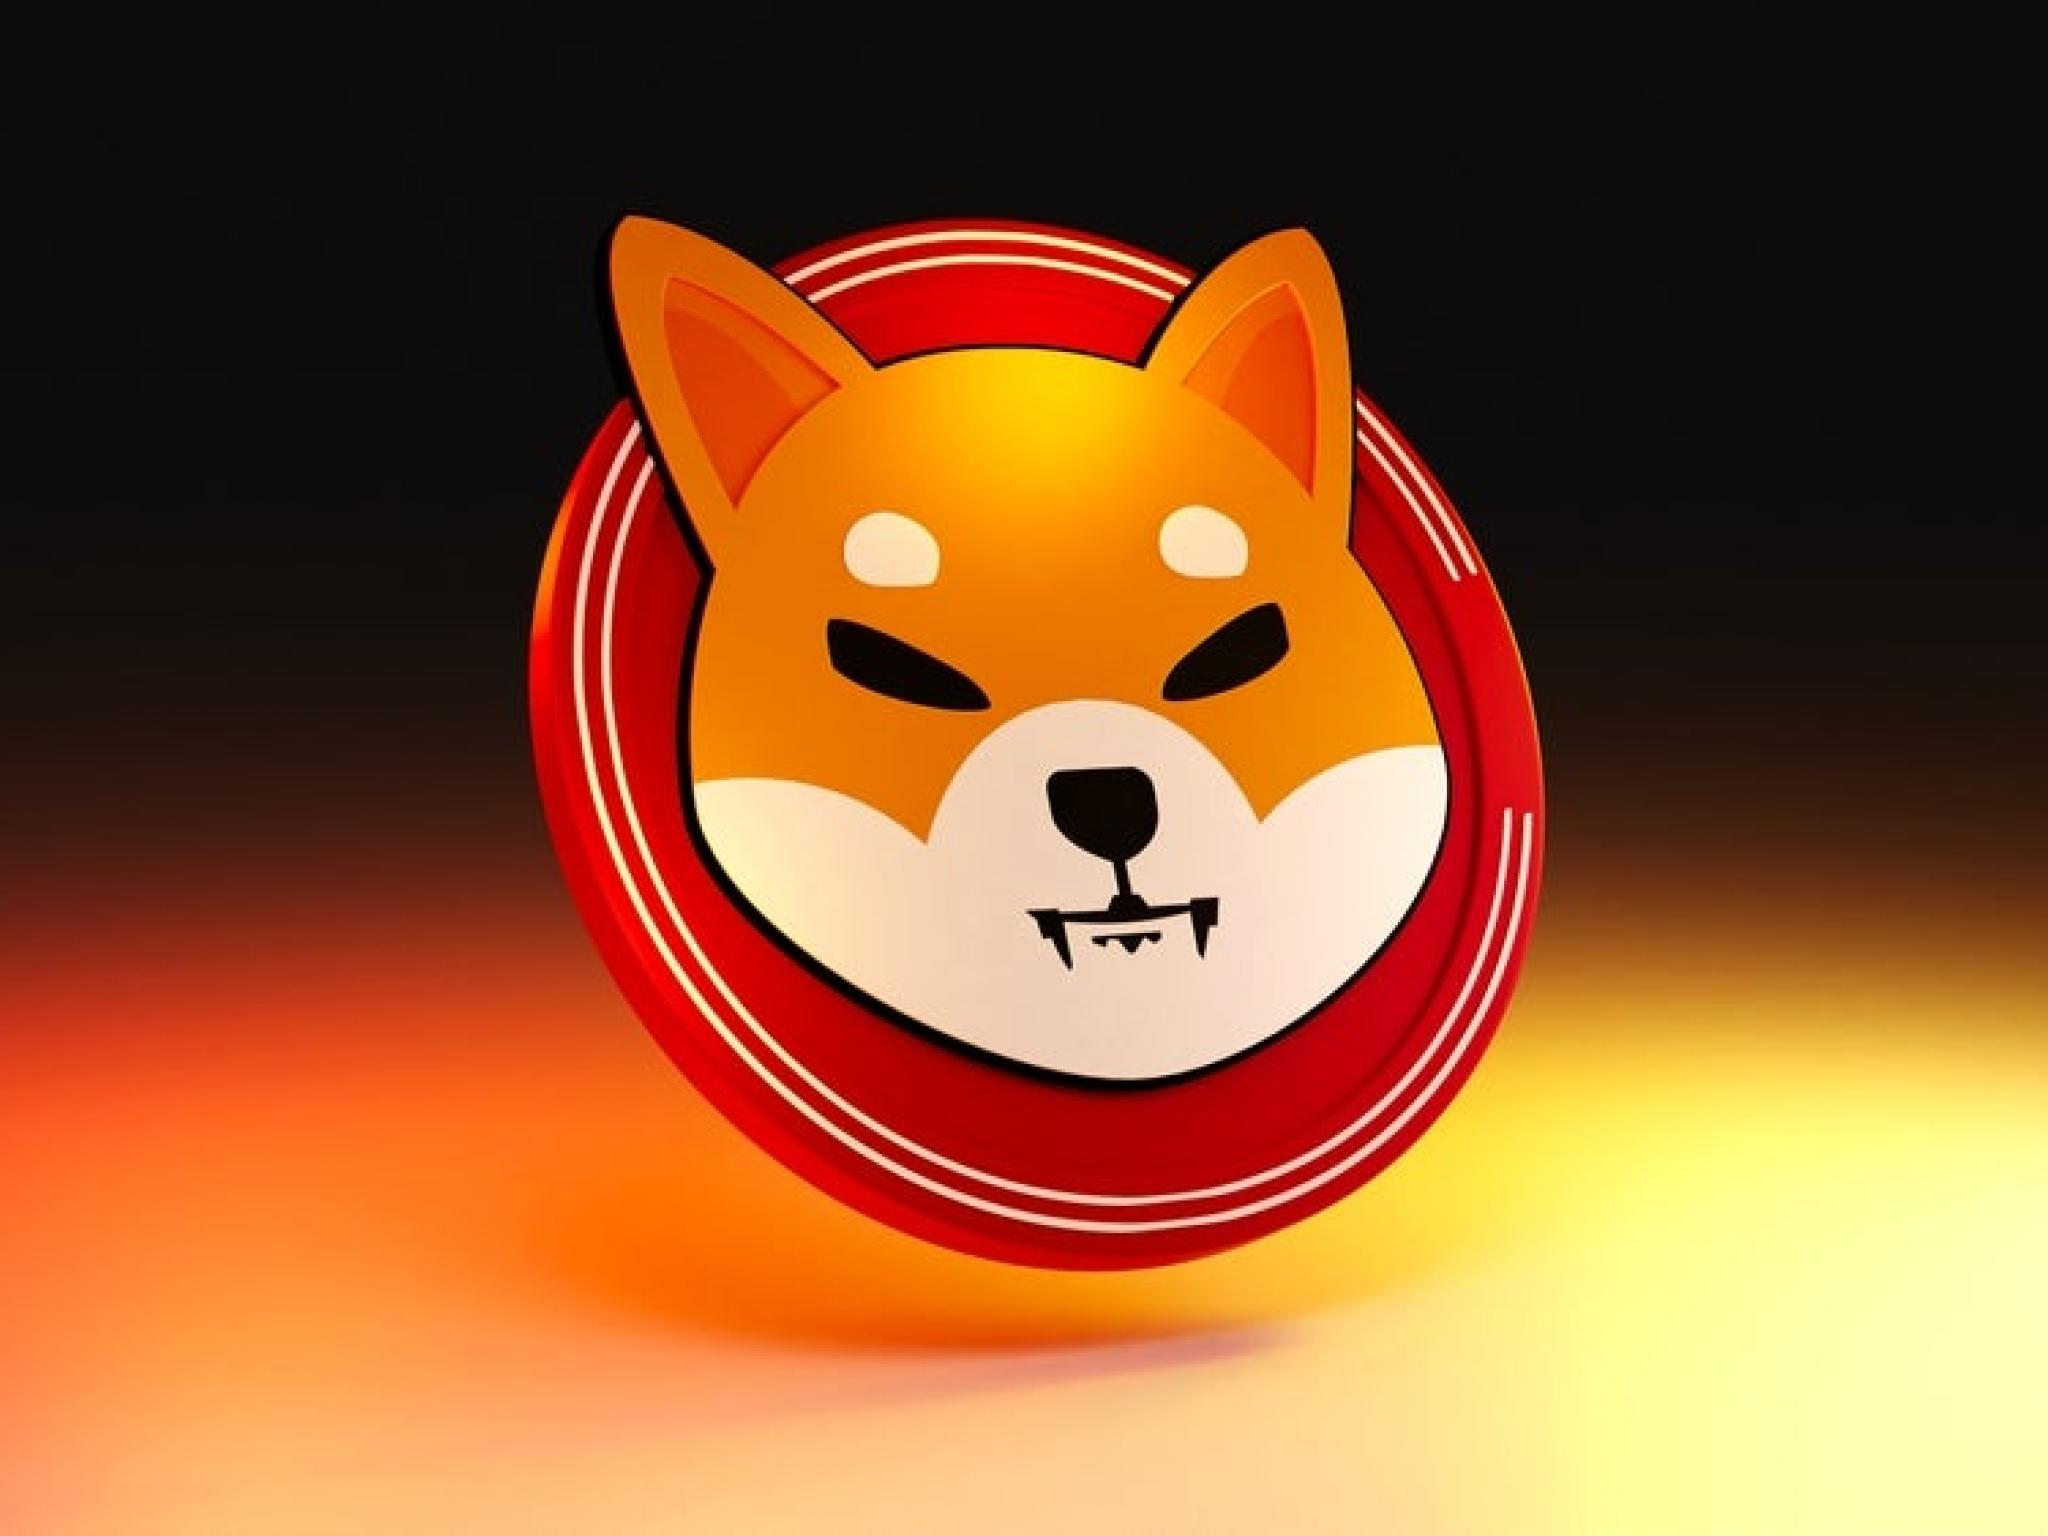  dogecoin-killer-shiba-inus-burn-rate-soars-459-large-transactions-witness-a-twofold-jump 